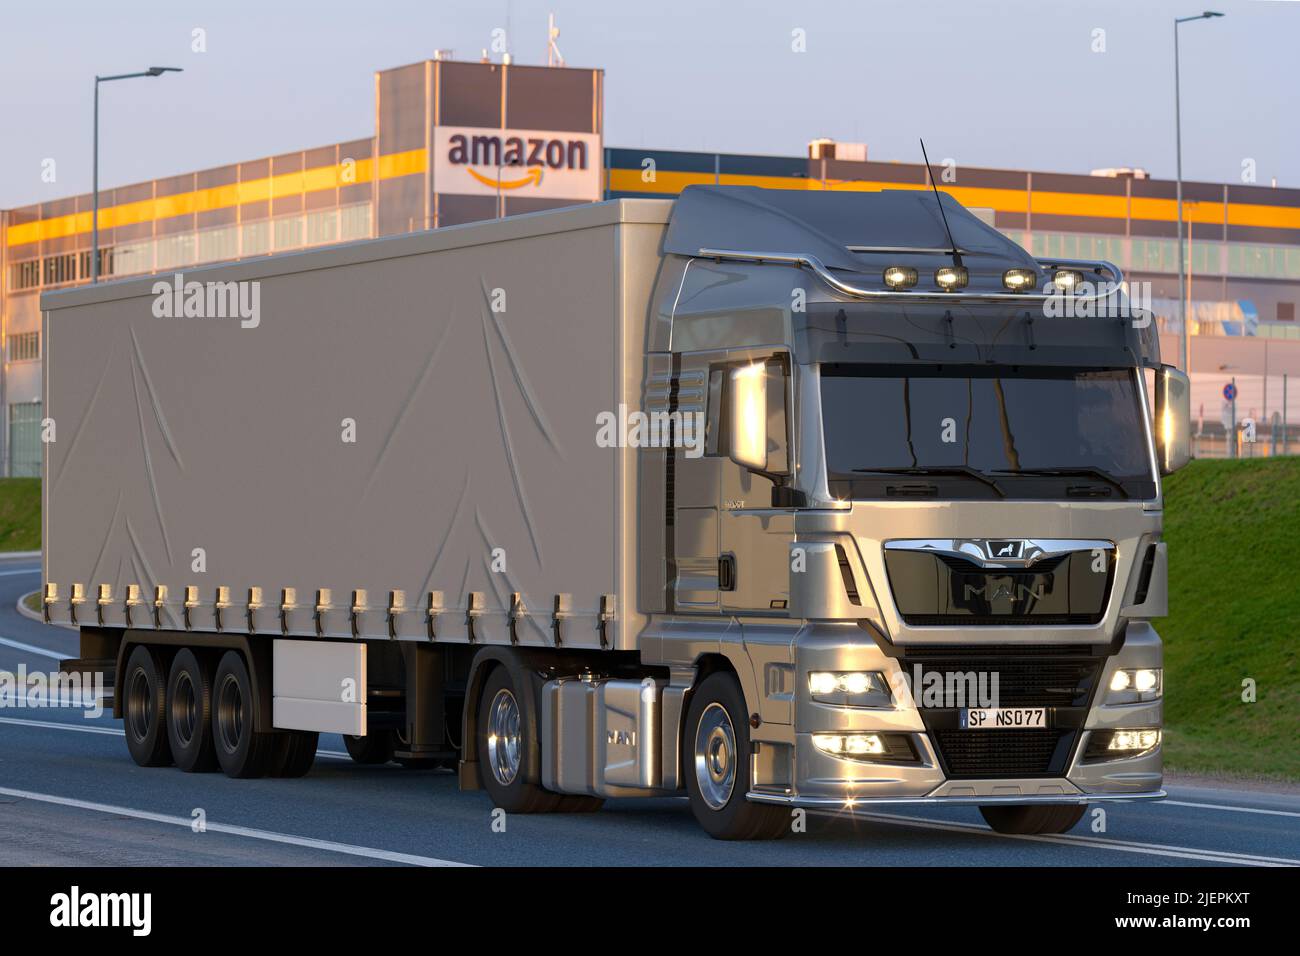 Man tgx hi-res stock photography and images - Alamy